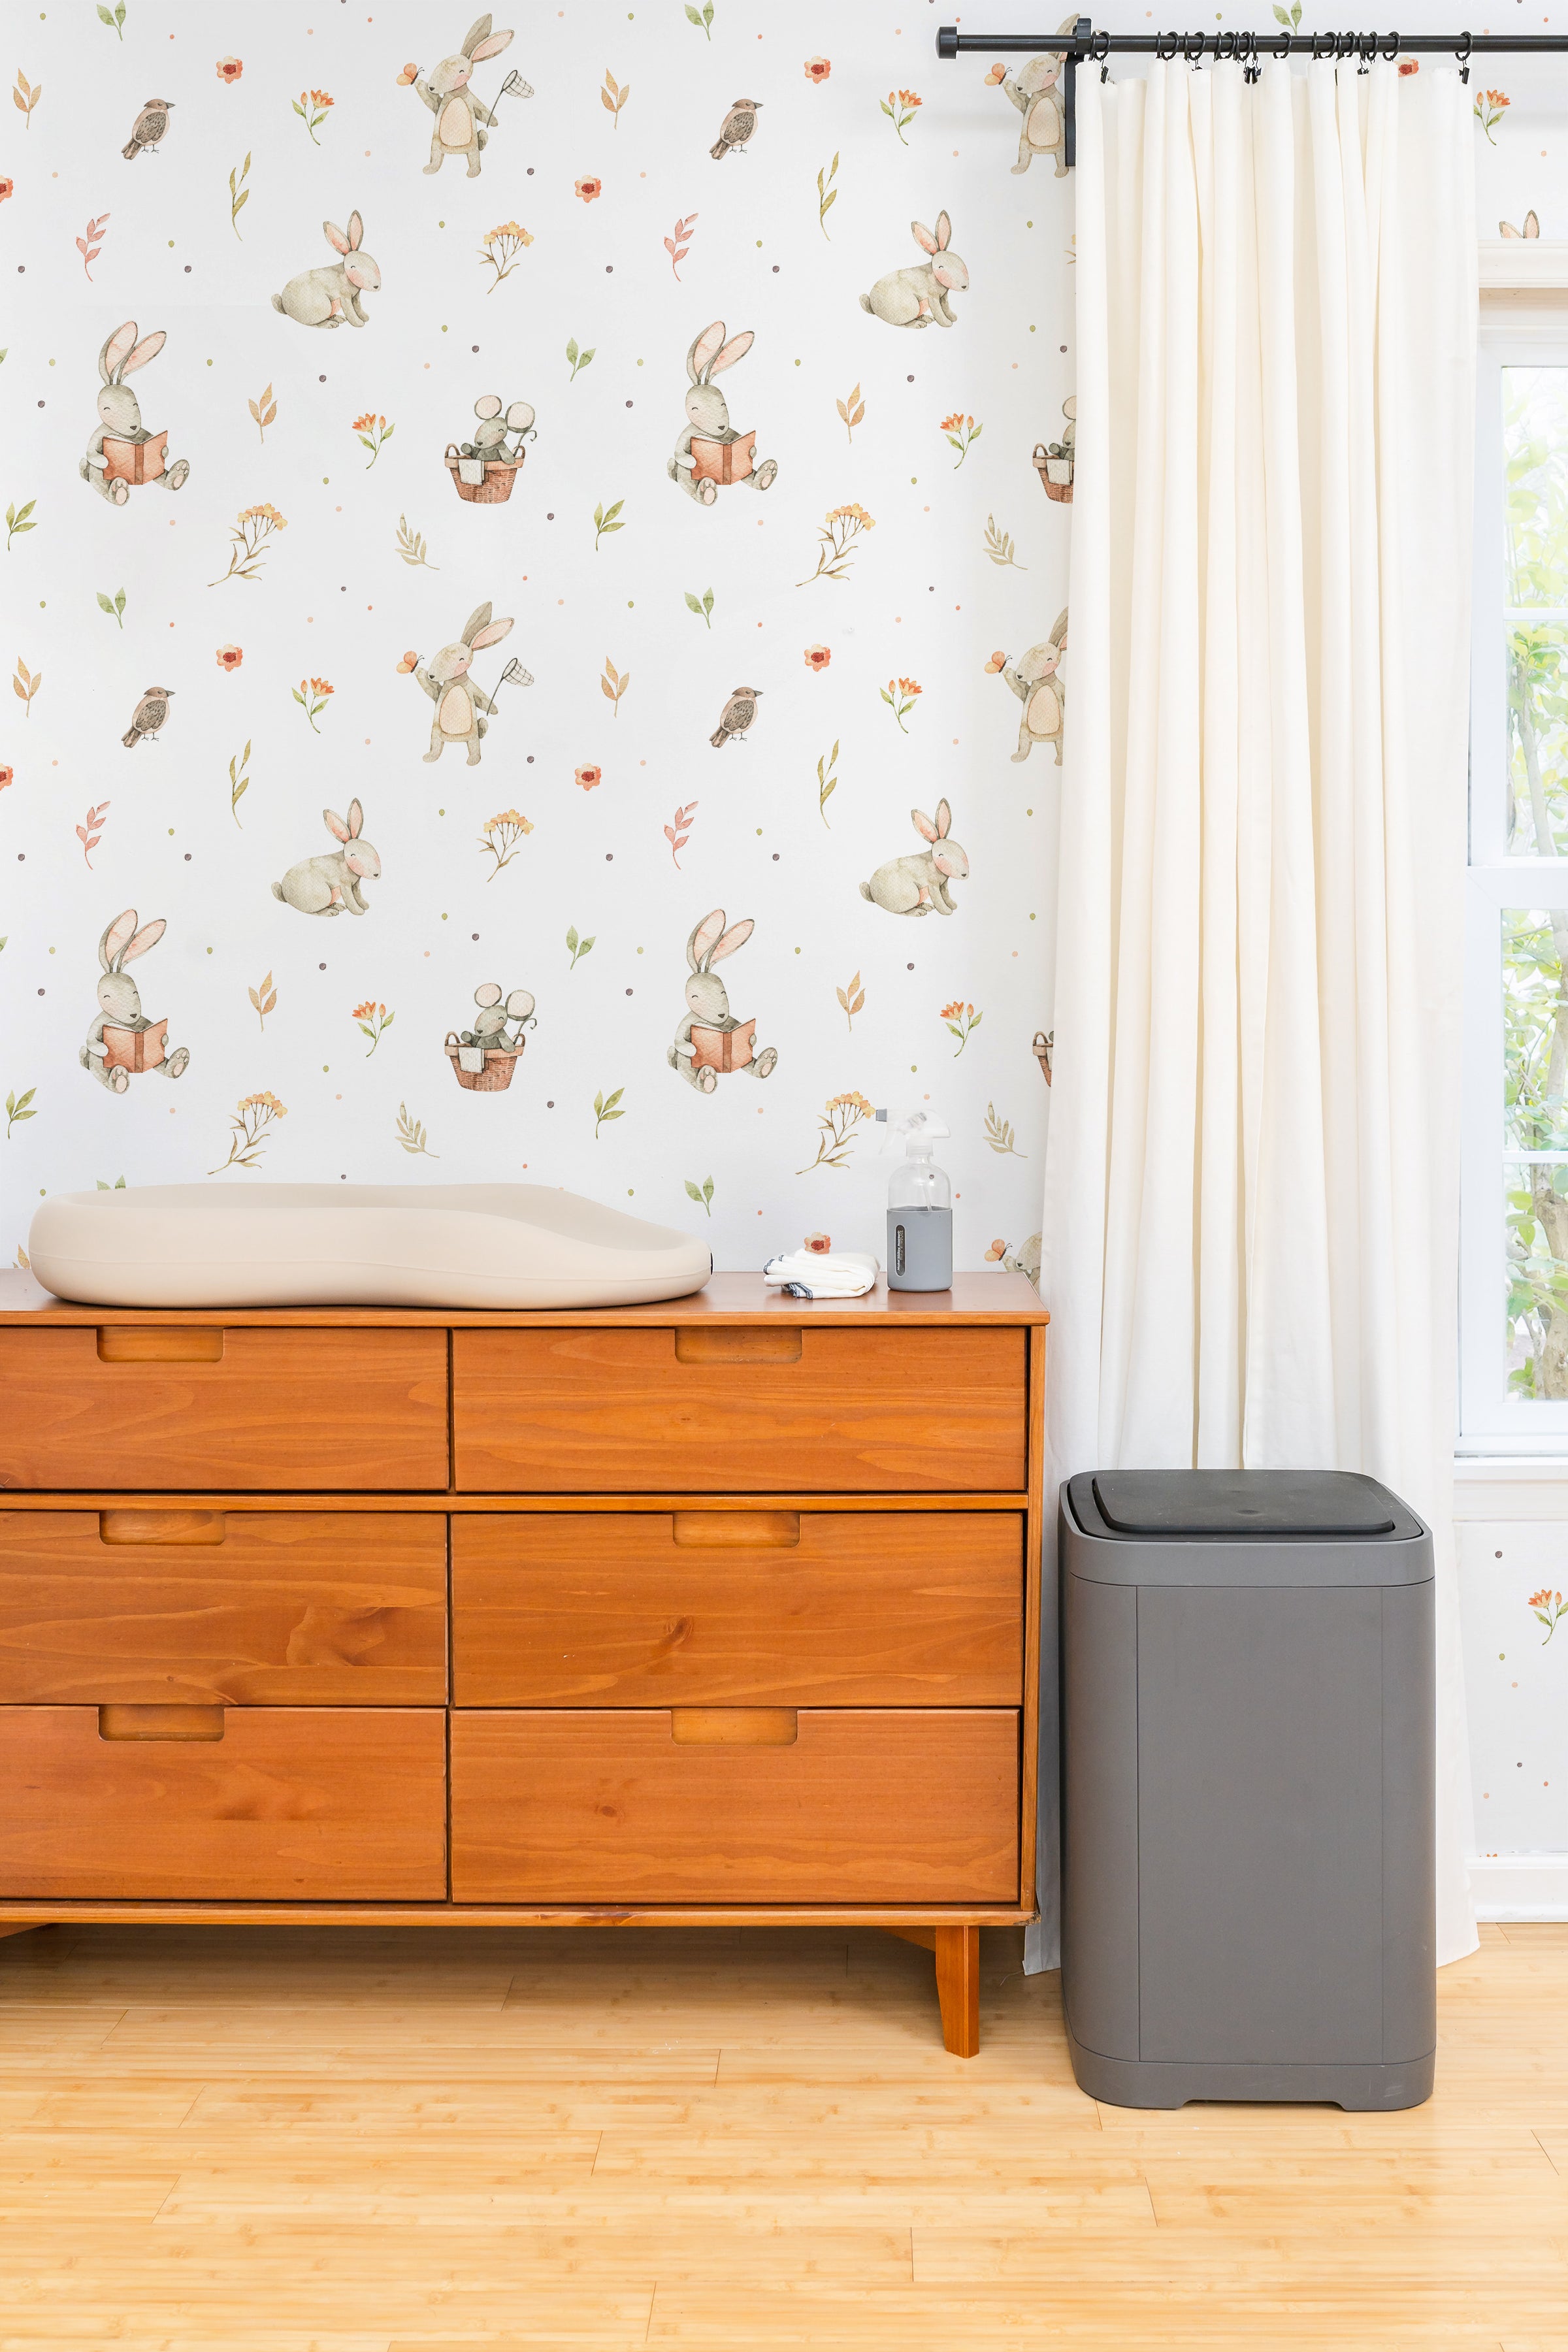 A nursery room adorned with Watercolour Bunnies Wallpaper creating a gentle and whimsical ambiance. The wallpaper showcases soft-toned bunnies, birds, and flora, complementing the room's calm decor and wooden furniture